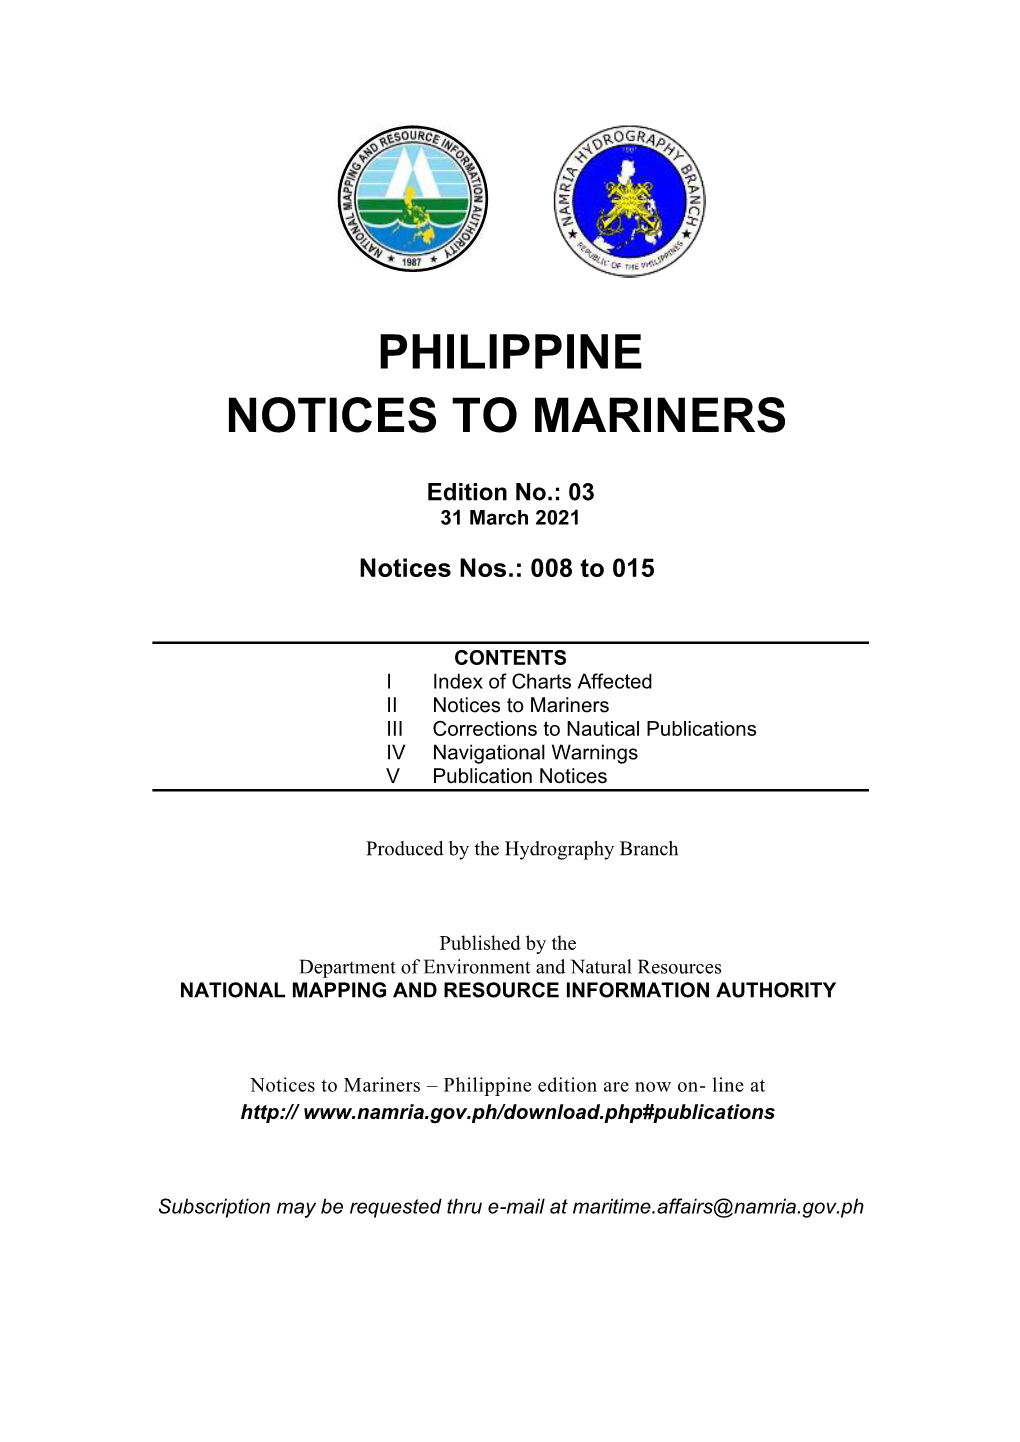 Philippine Notice to Mariners March 2021 Edition